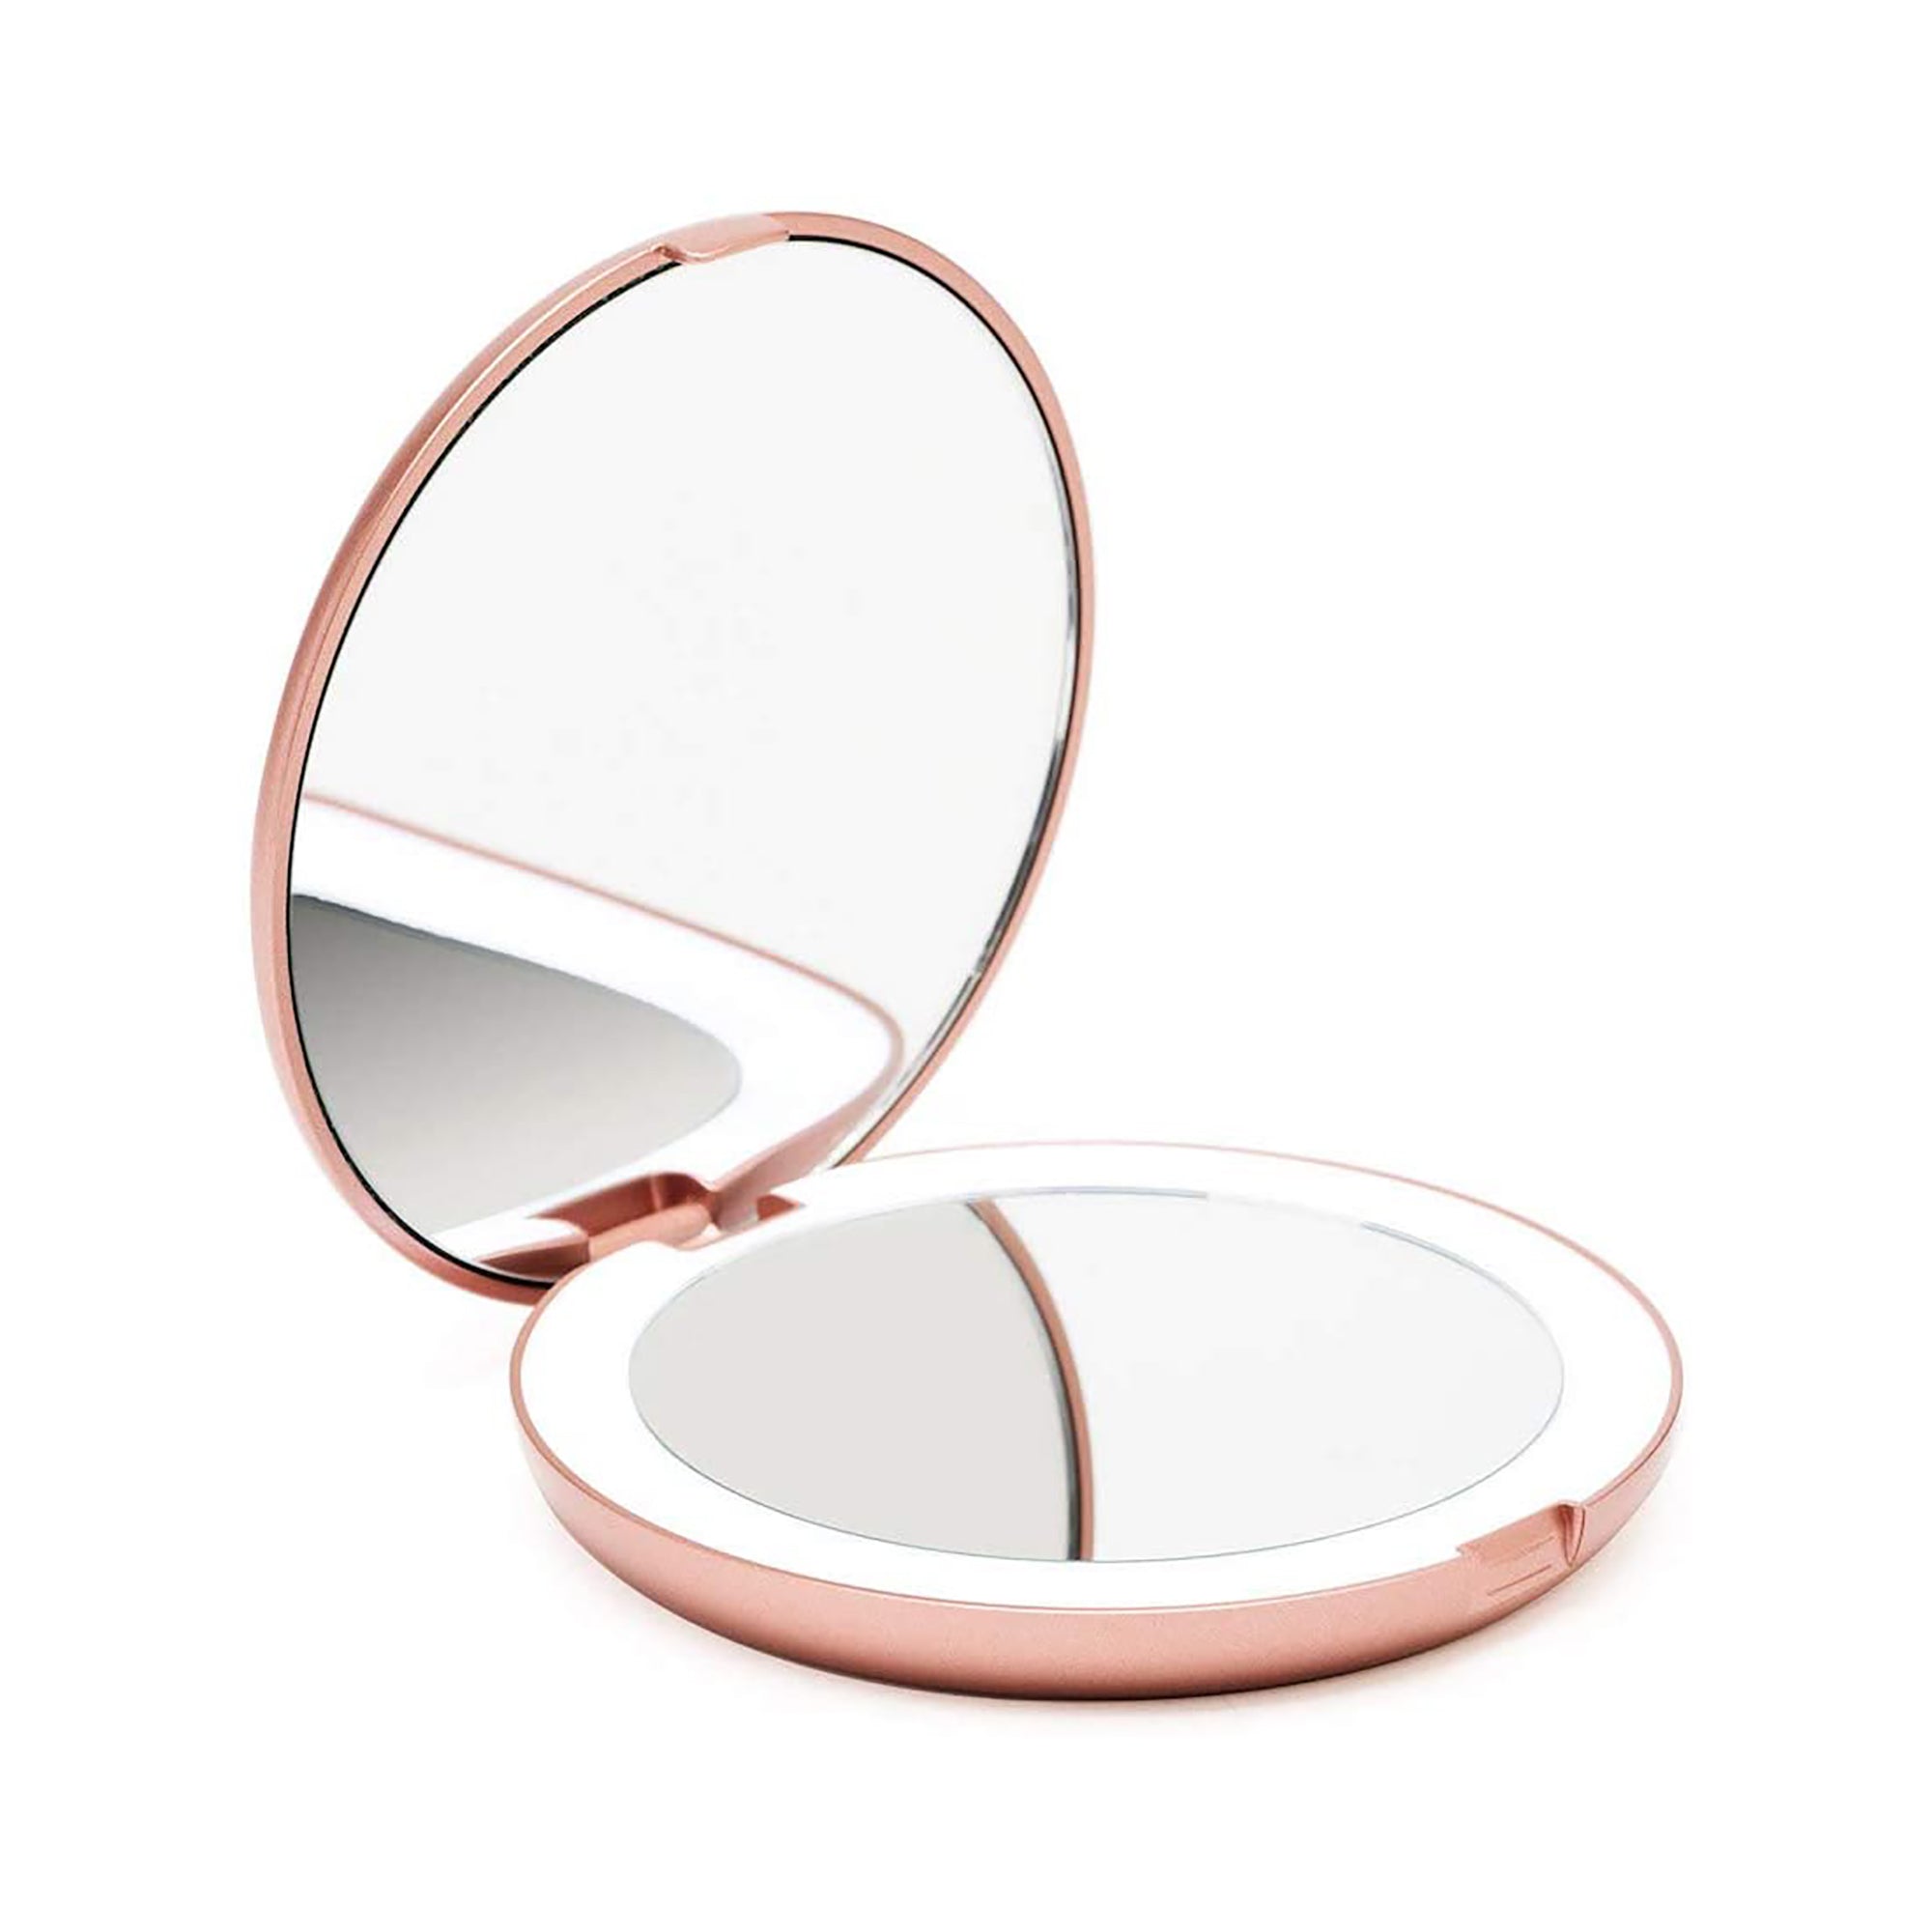 Fancii Lumi 5" Compact Mirror with LED Lights / ROSE GOLD